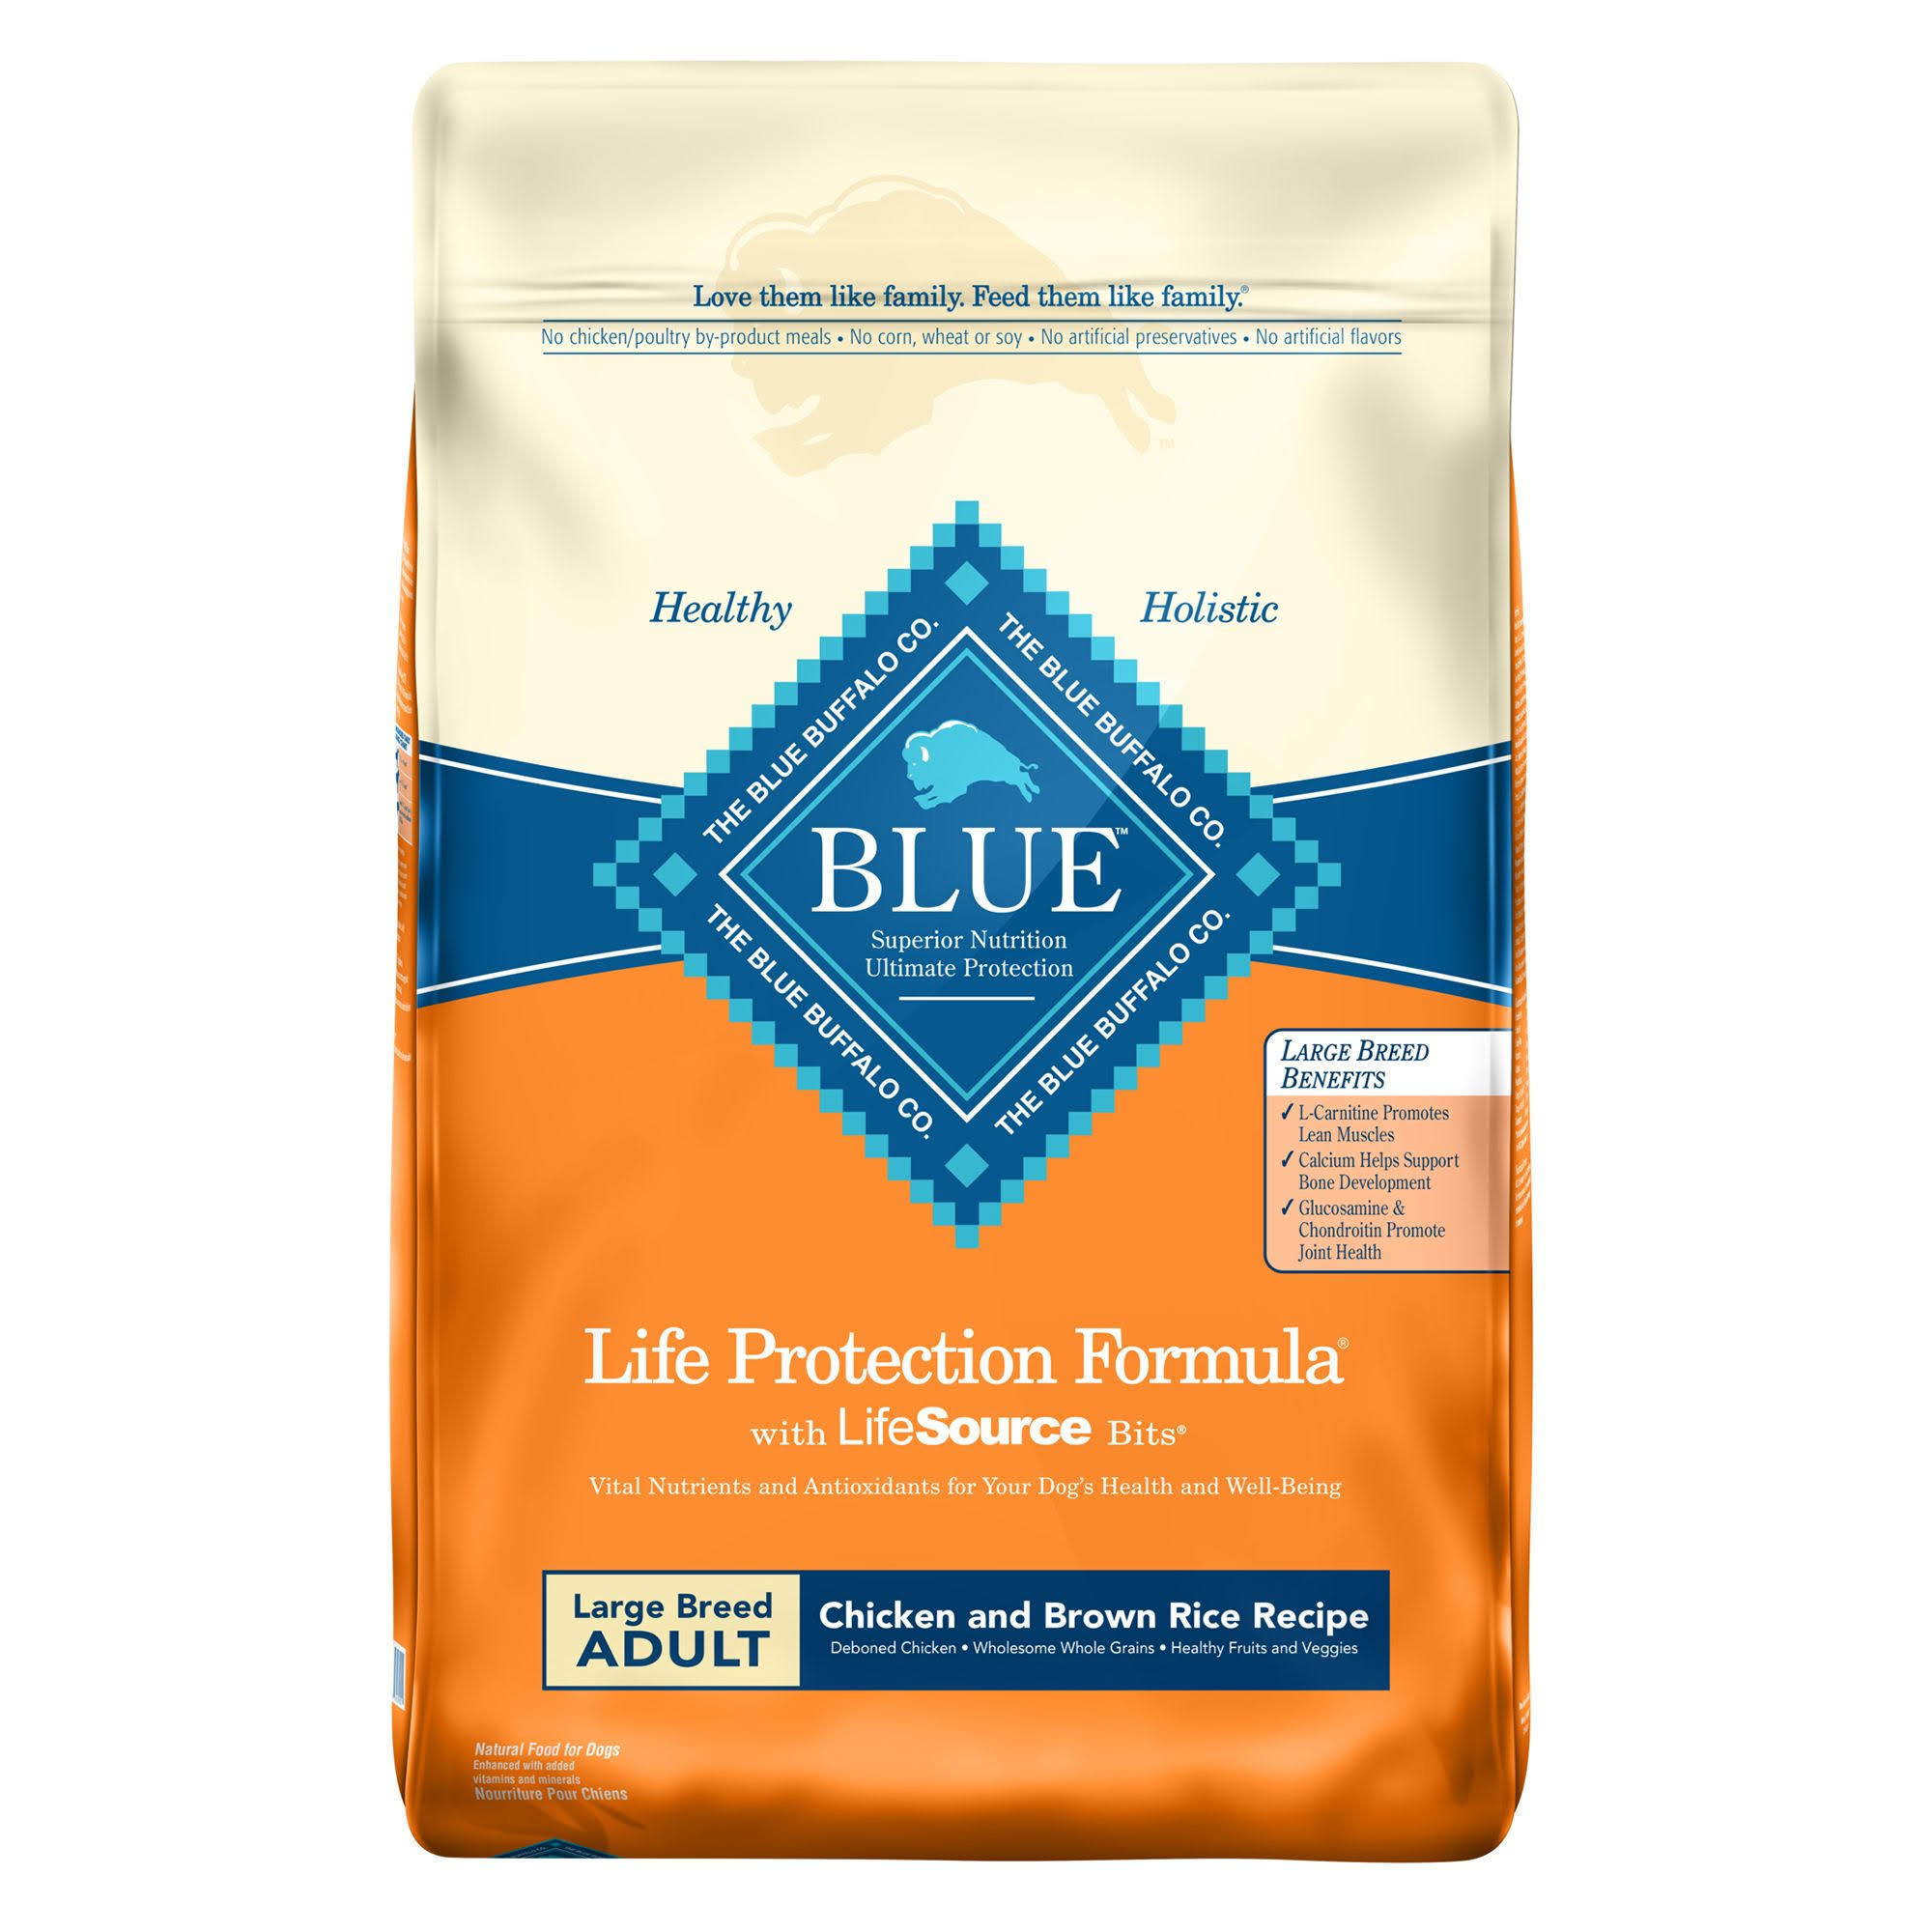 Blue Buffalo Large Breed Adult Dog Dry Food - Chicken & Brown Rice, 30lb